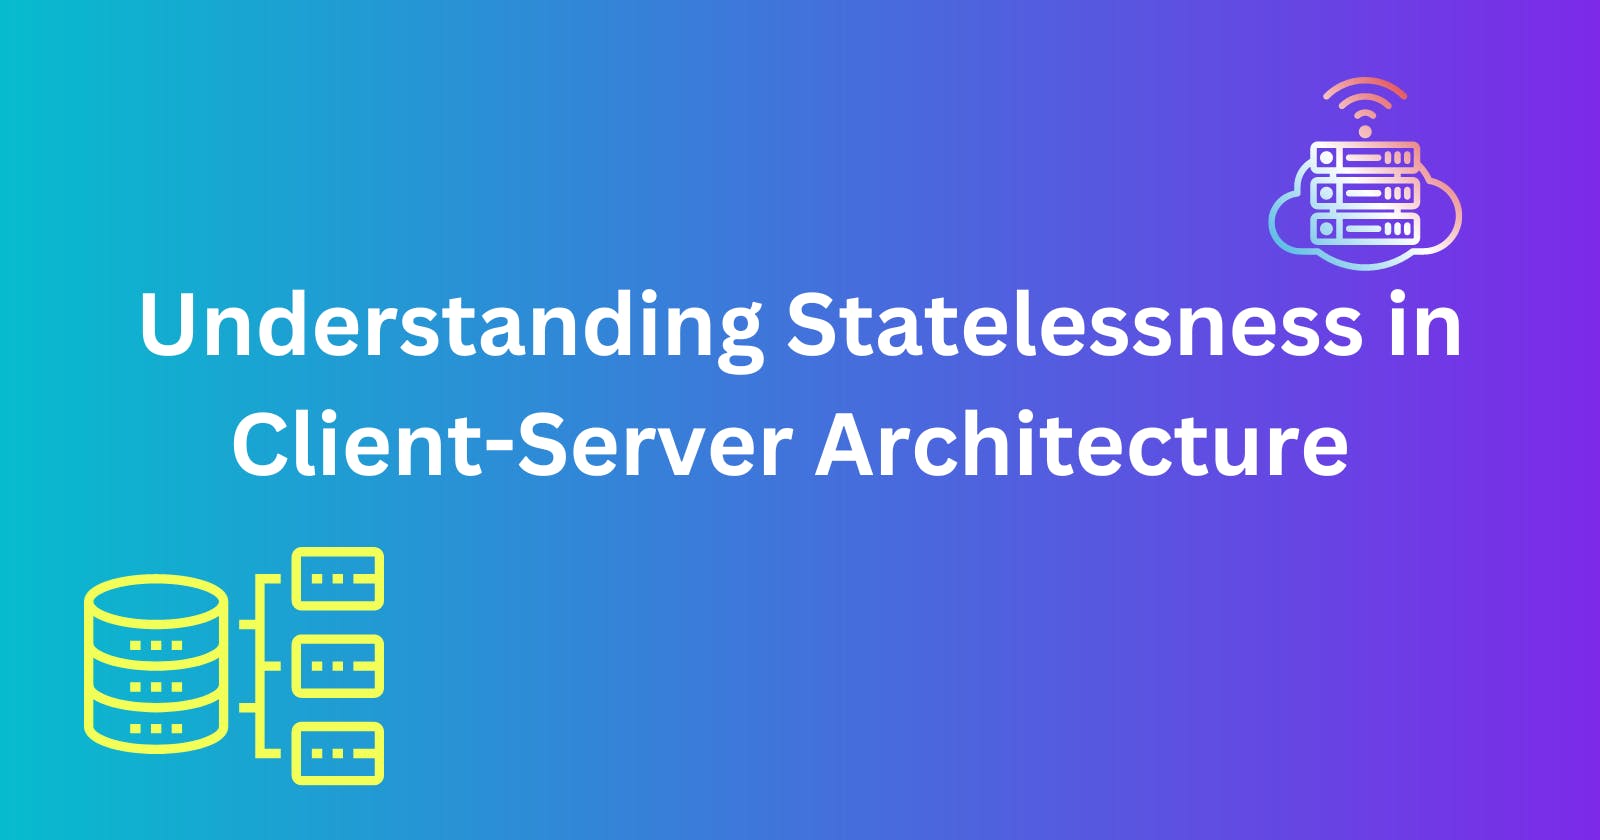 Understanding Statelessness in Client-Server Architecture